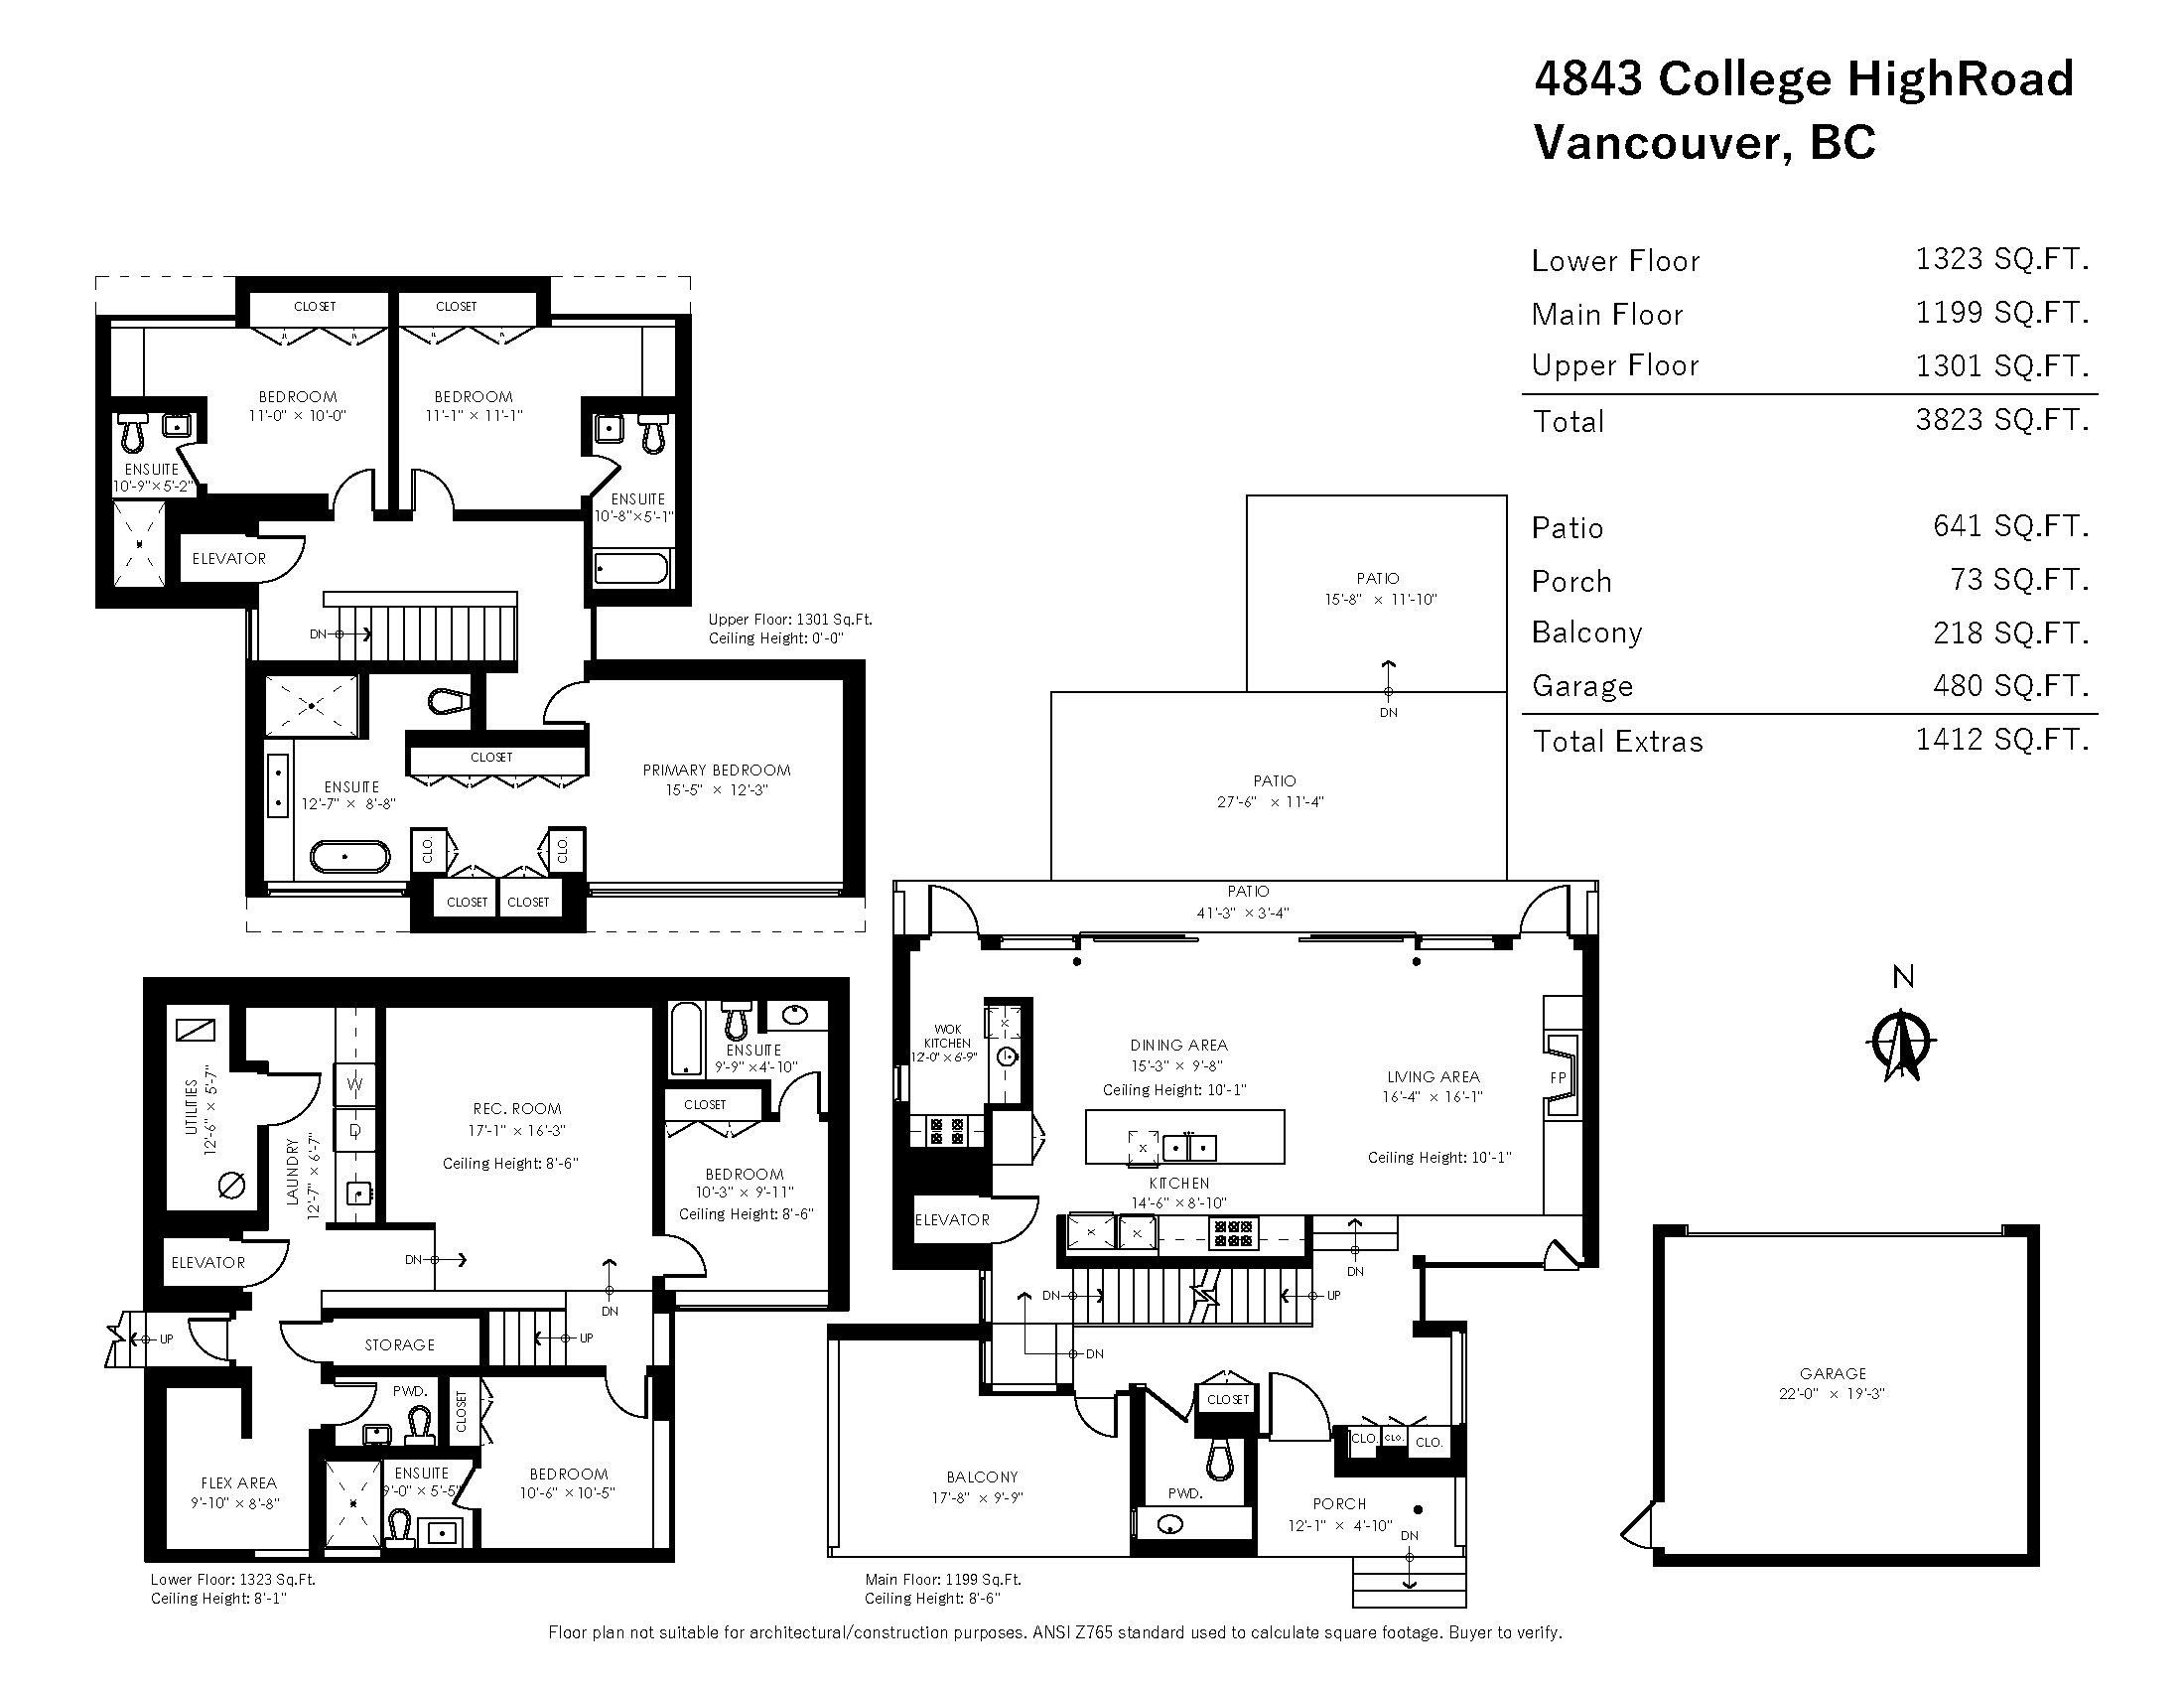 Listing image of 4843 COLLEGE HIGHROAD